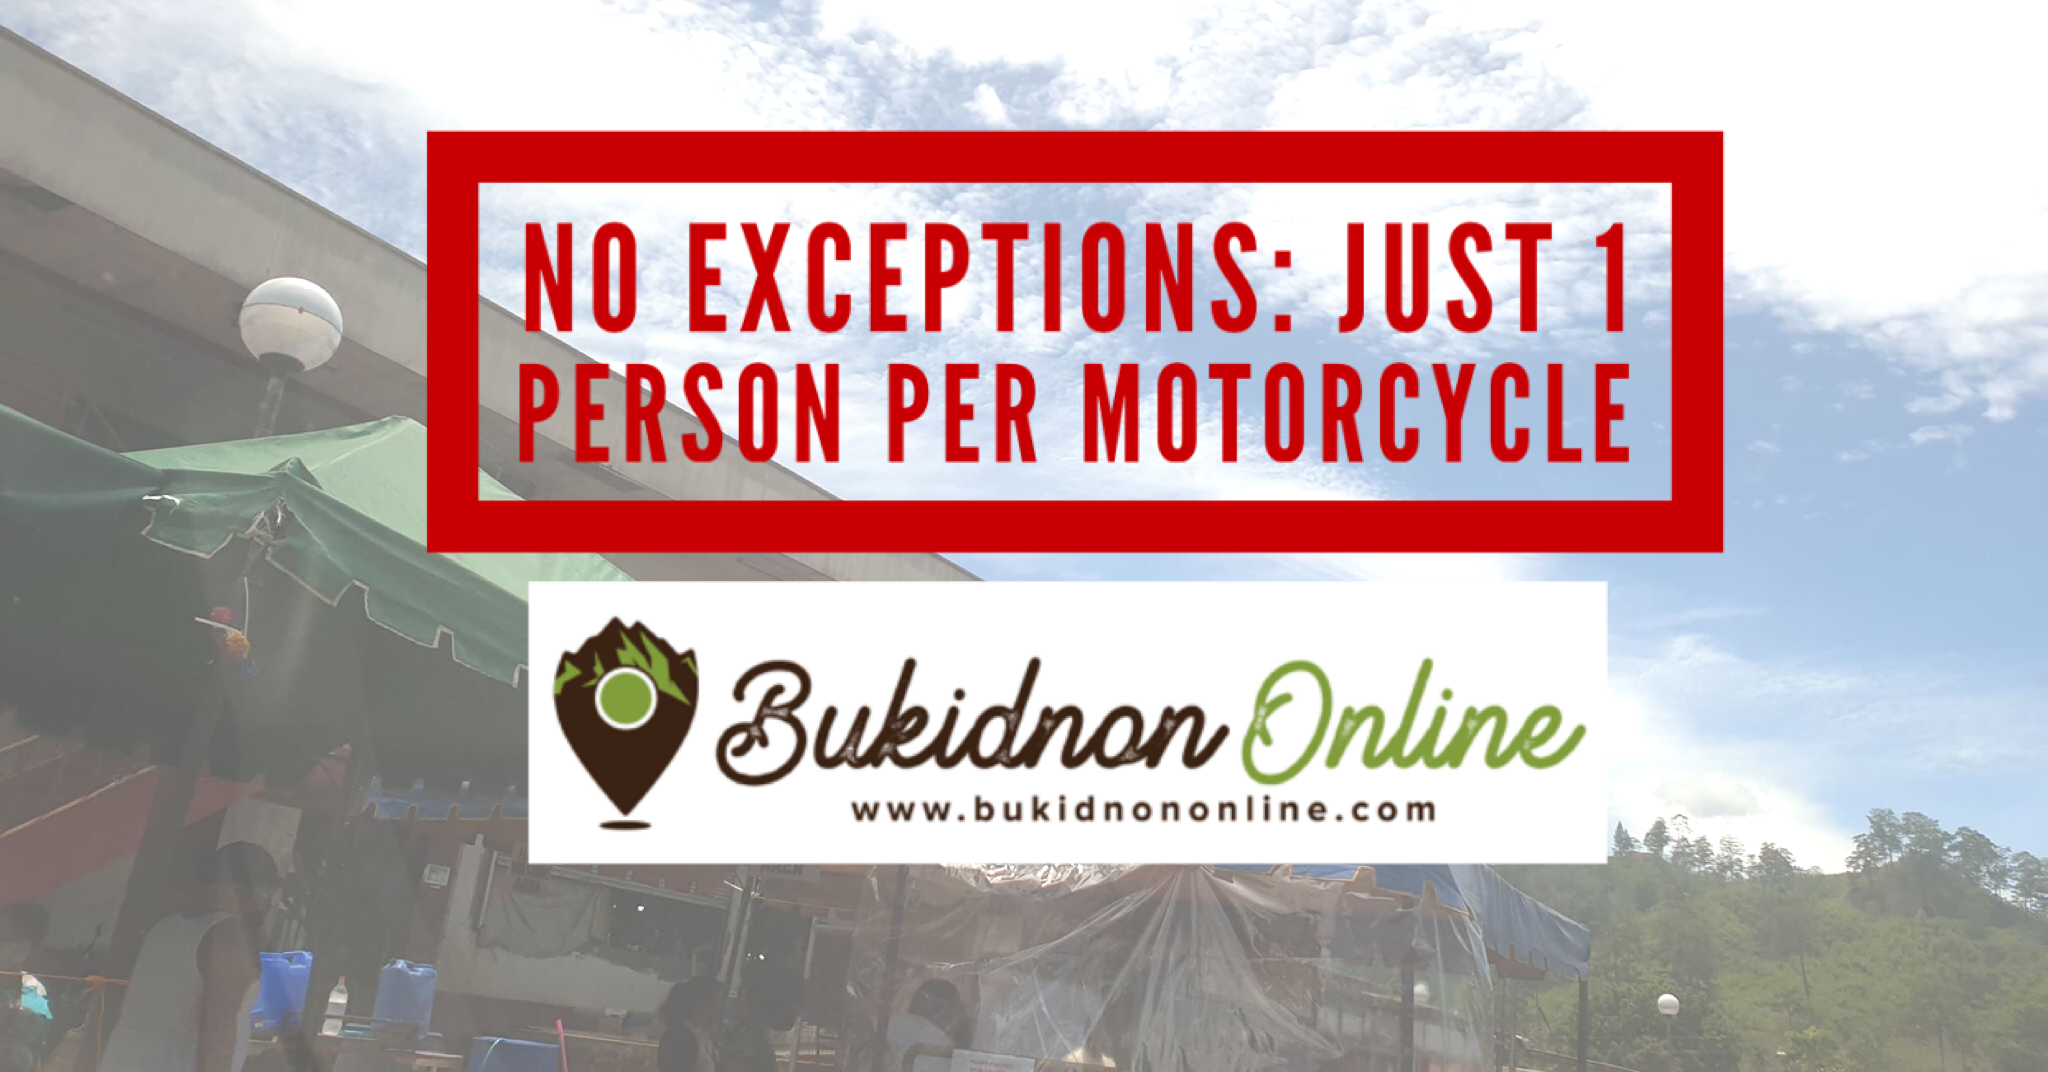 It's final: Only 1 person allowed per motorcycle